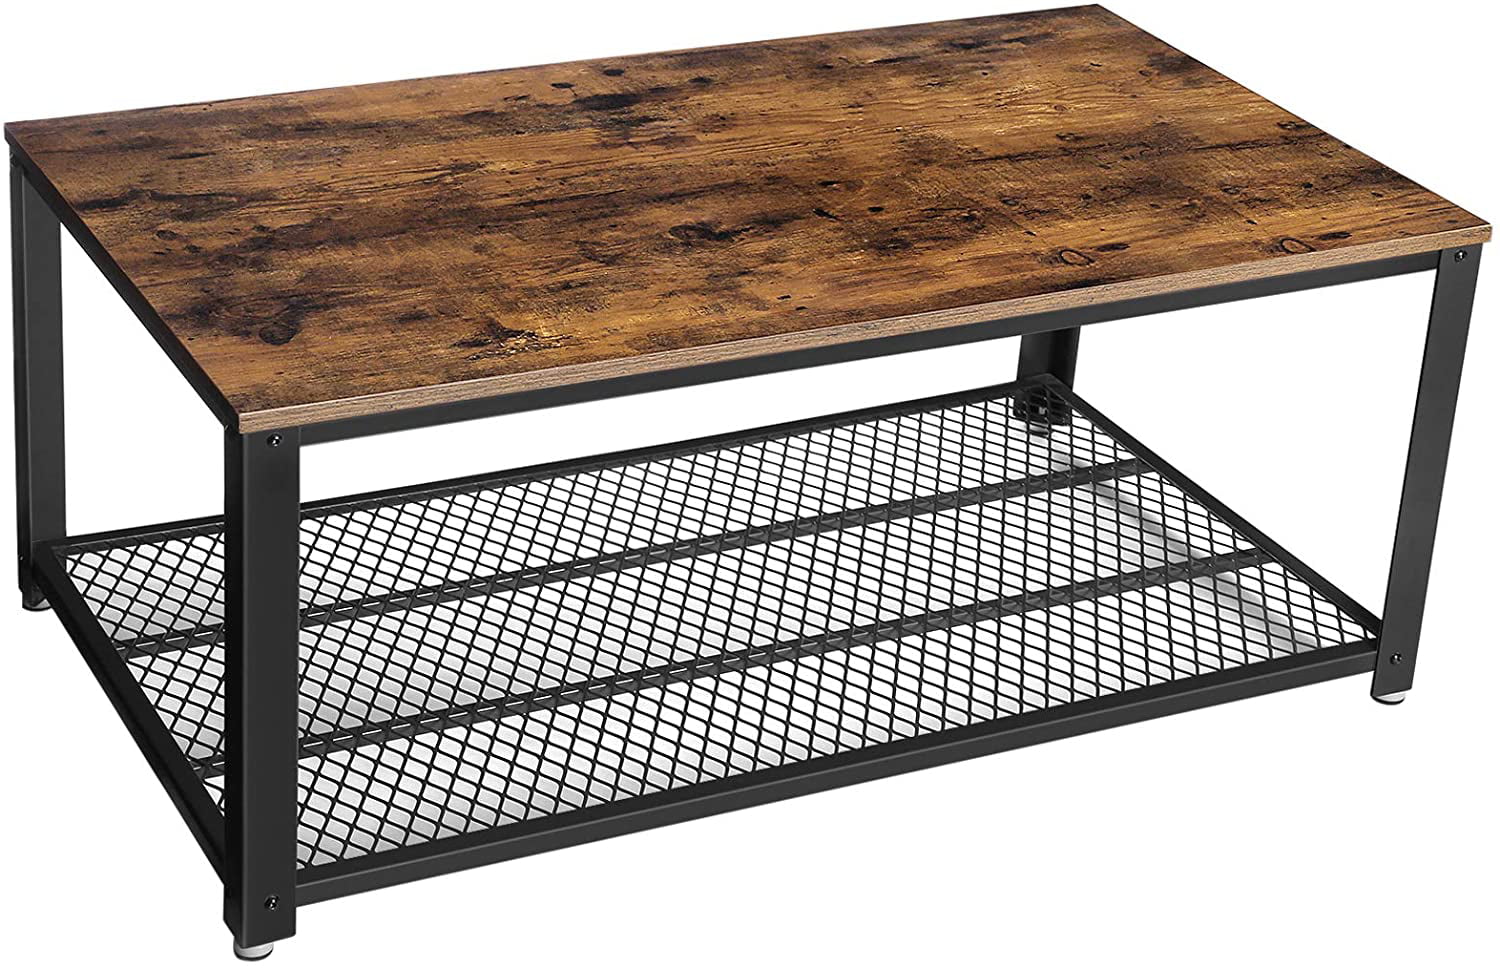 Vasagle Industrial Coffee Table With, Industrial Coffee Table With Storage